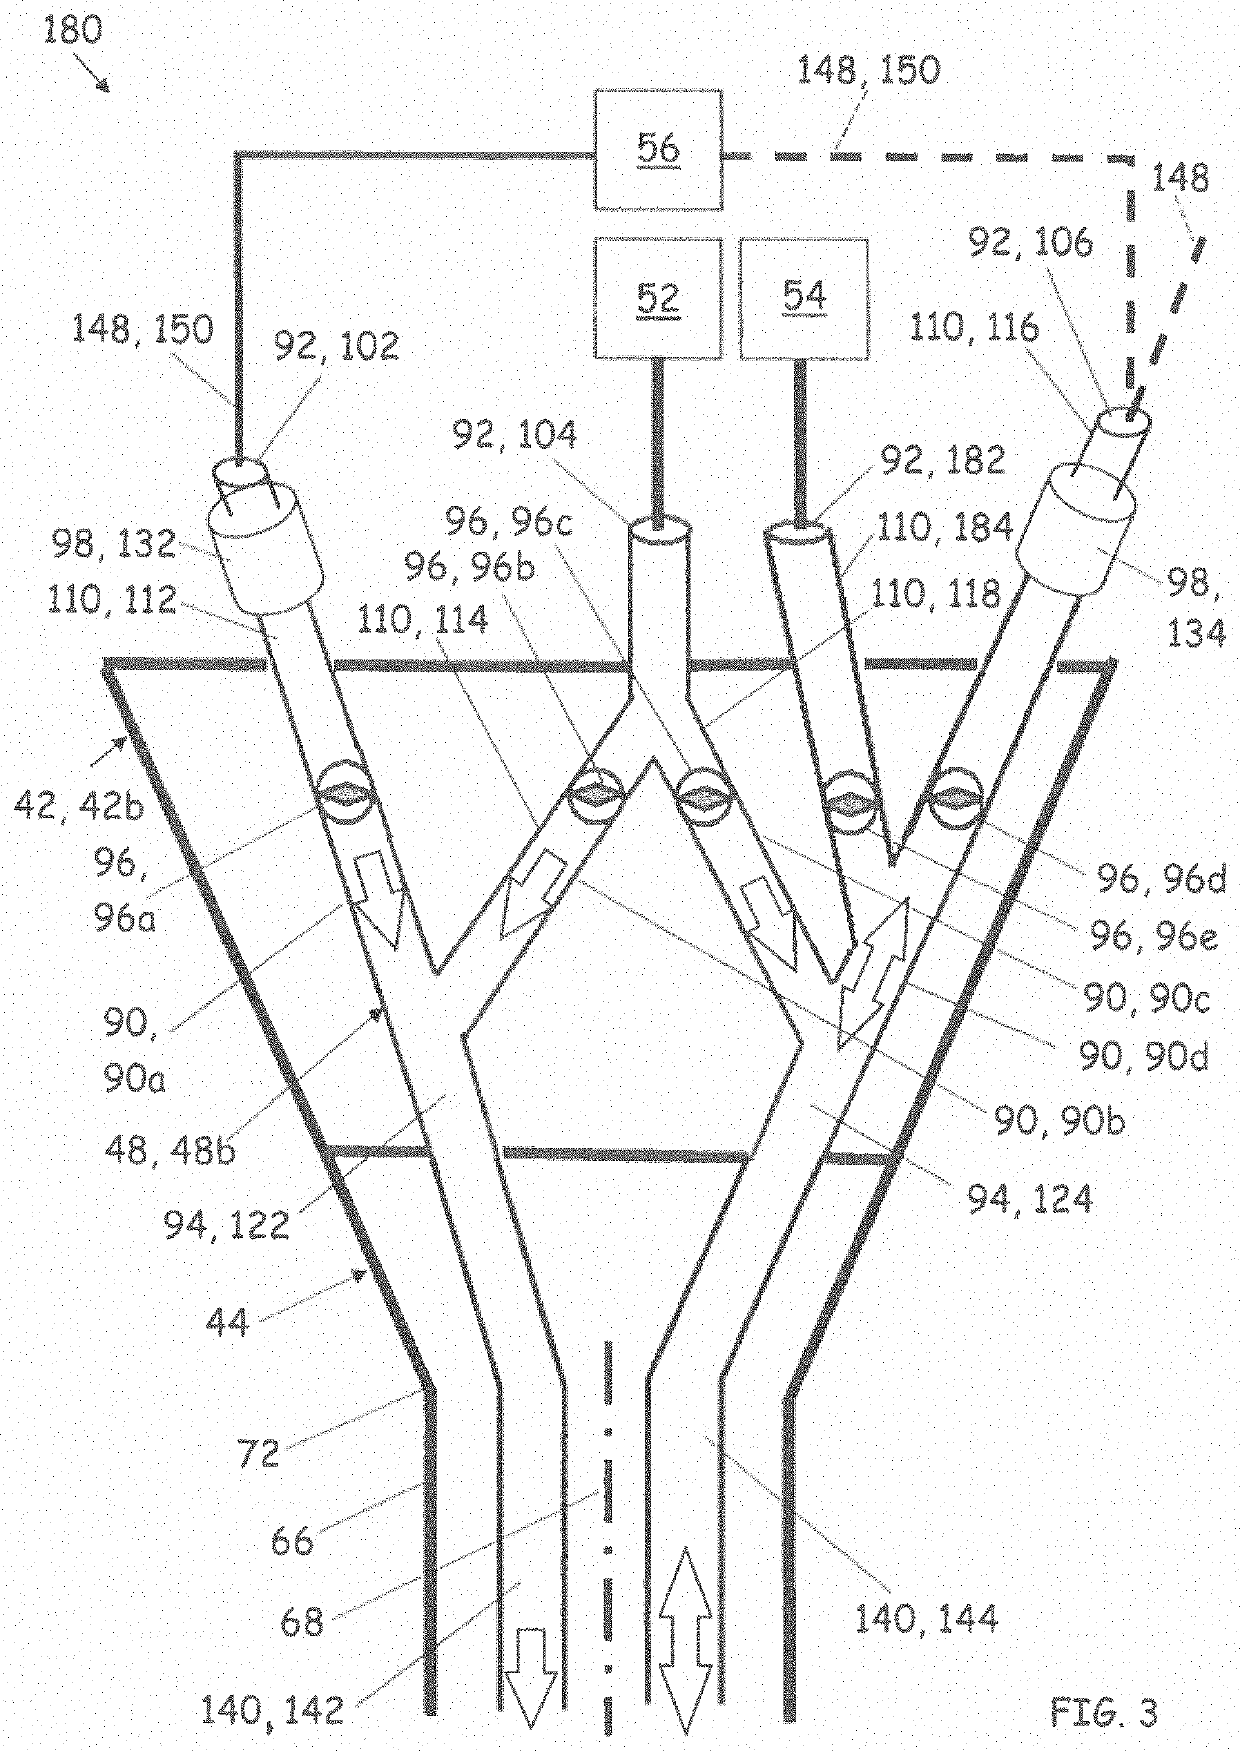 Steering handle with multi-channel manifold